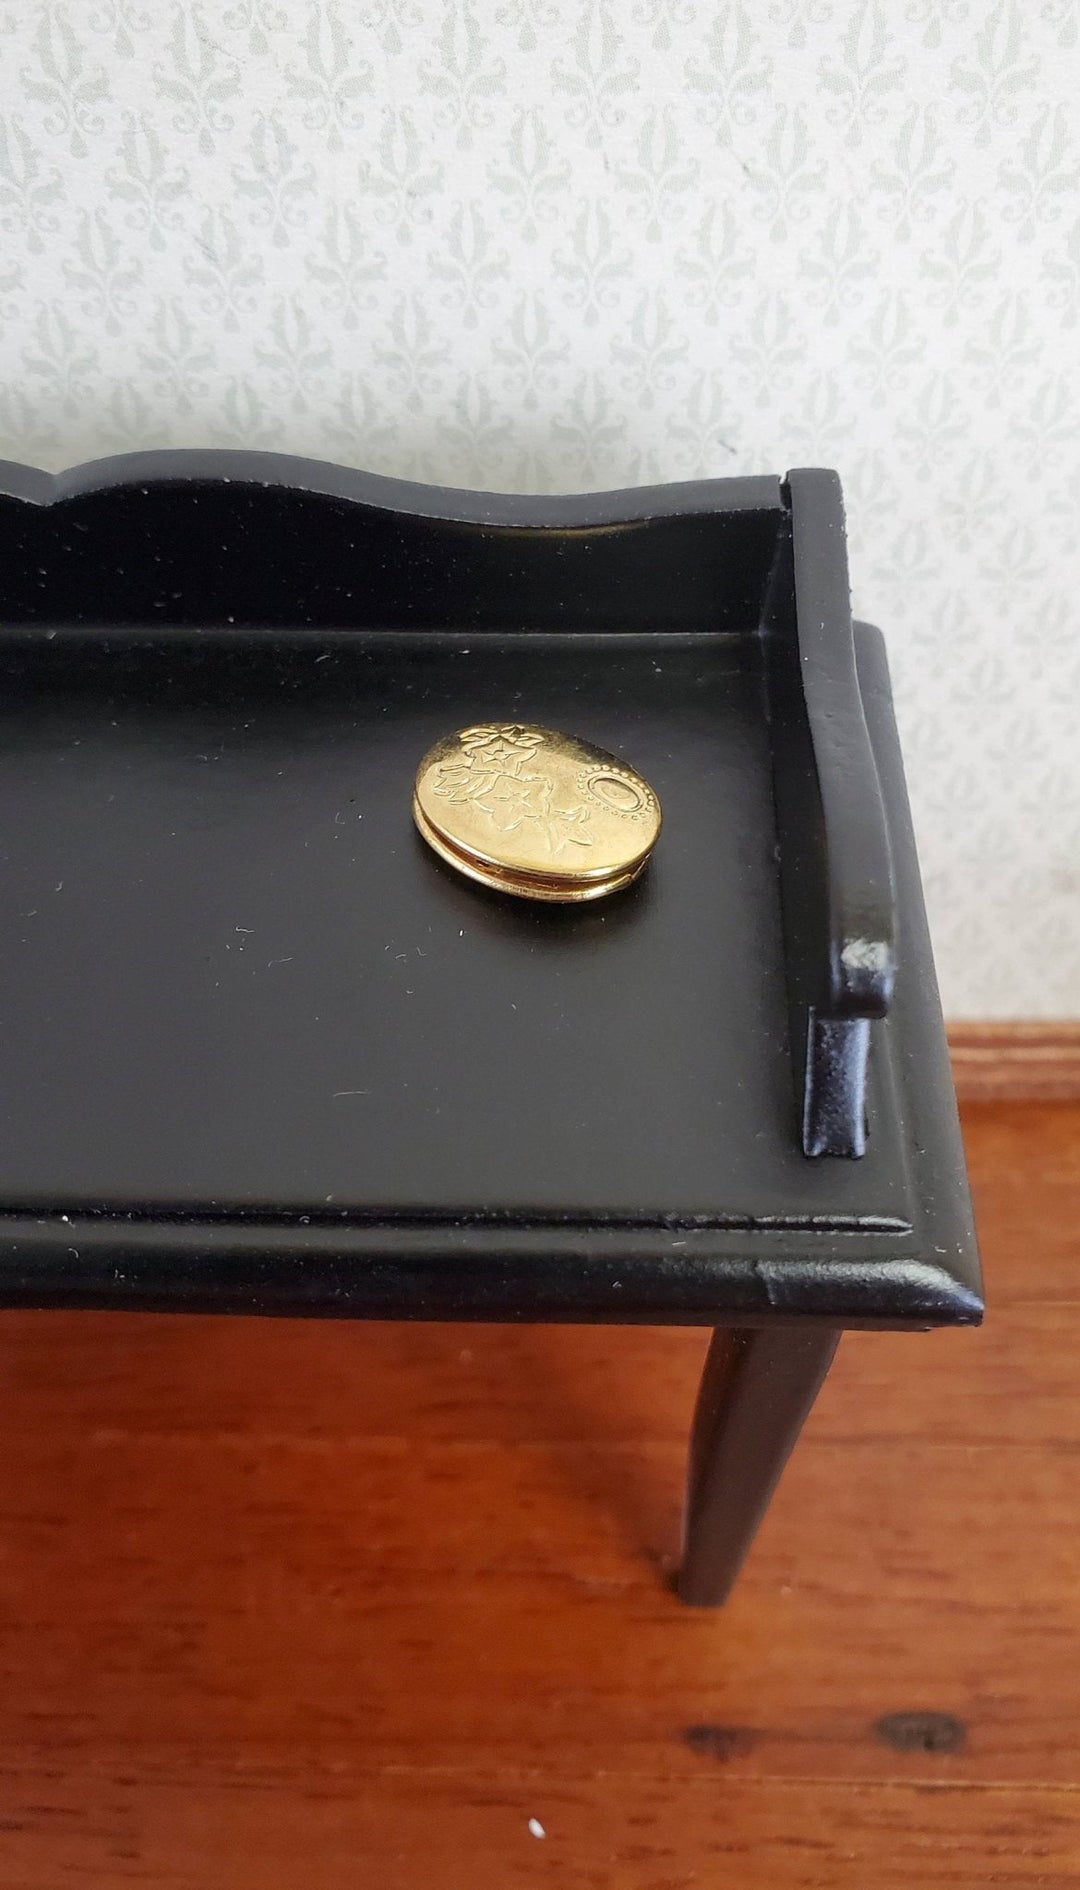 Dollhouse Miniature Compact Clasp Make-Up Container 1:6 Scale - Miniature Crush